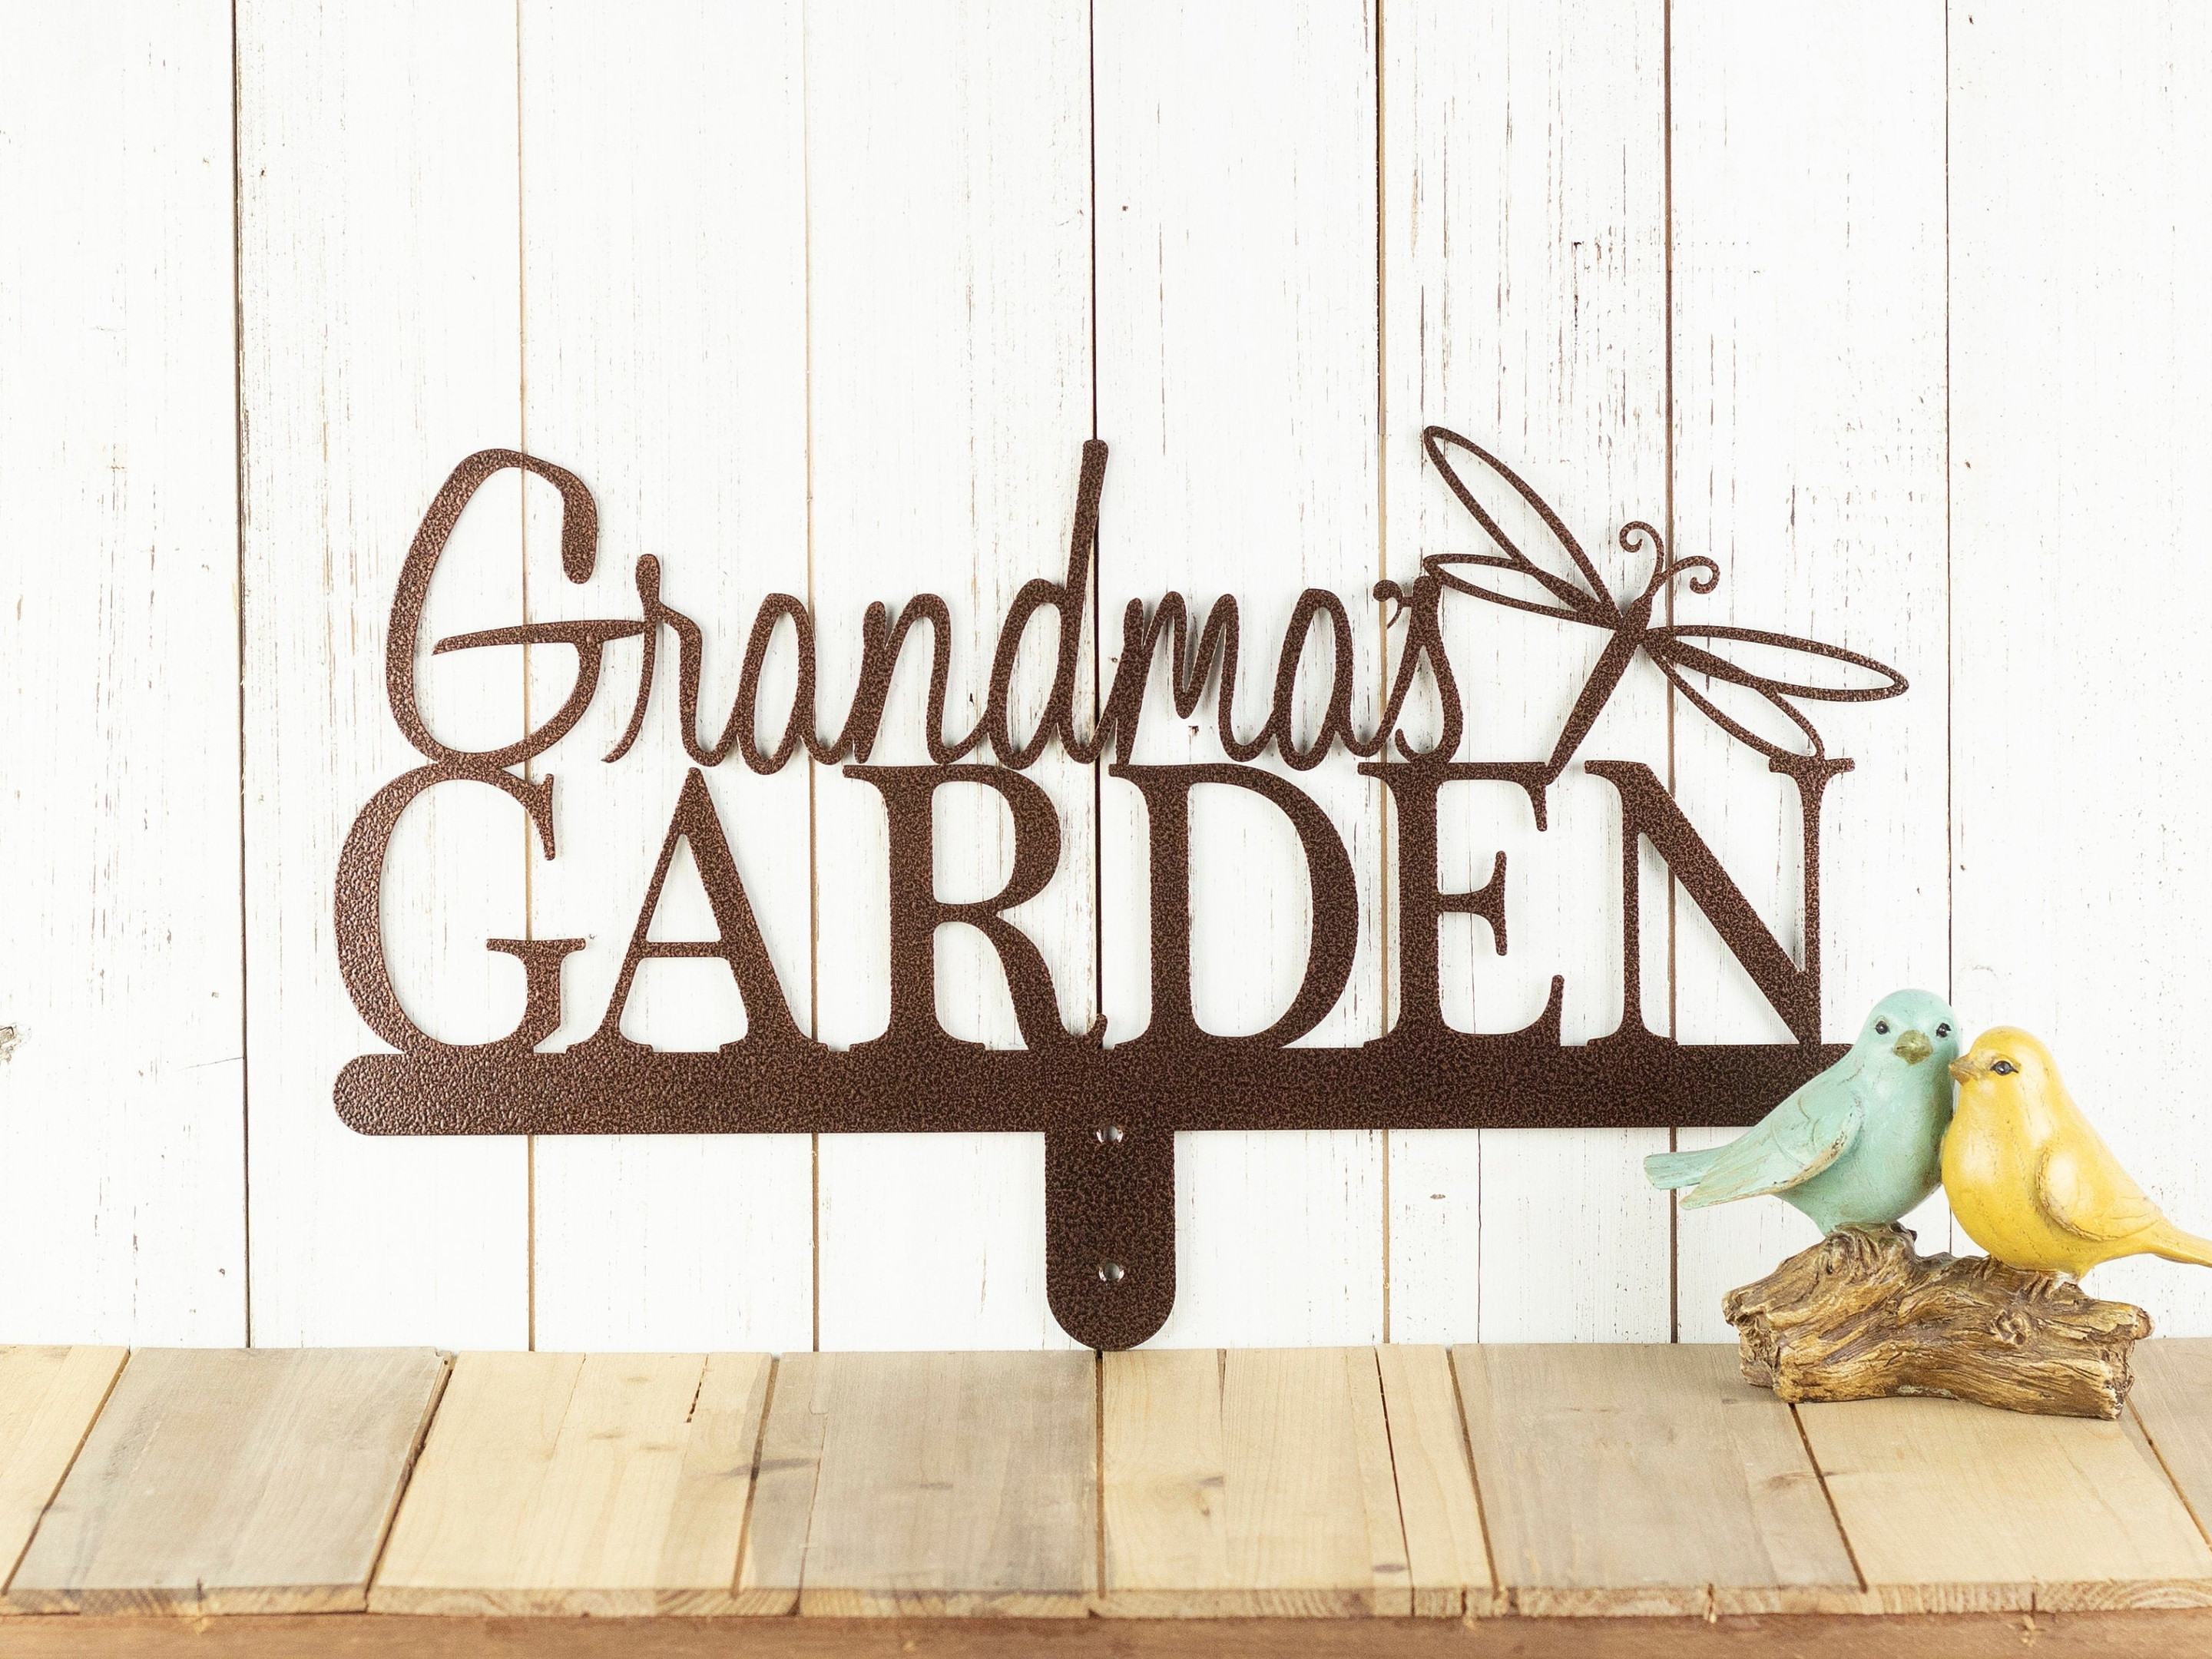 Custom Garden Sign Metal Outdoor Decor, Personalized Sign, Garden Decor, Metal Garden Art, Garden Plaque, Name Sign, Dragonfly, Laser Cut Metal Signs Custom Gift Ideas 12x12IN